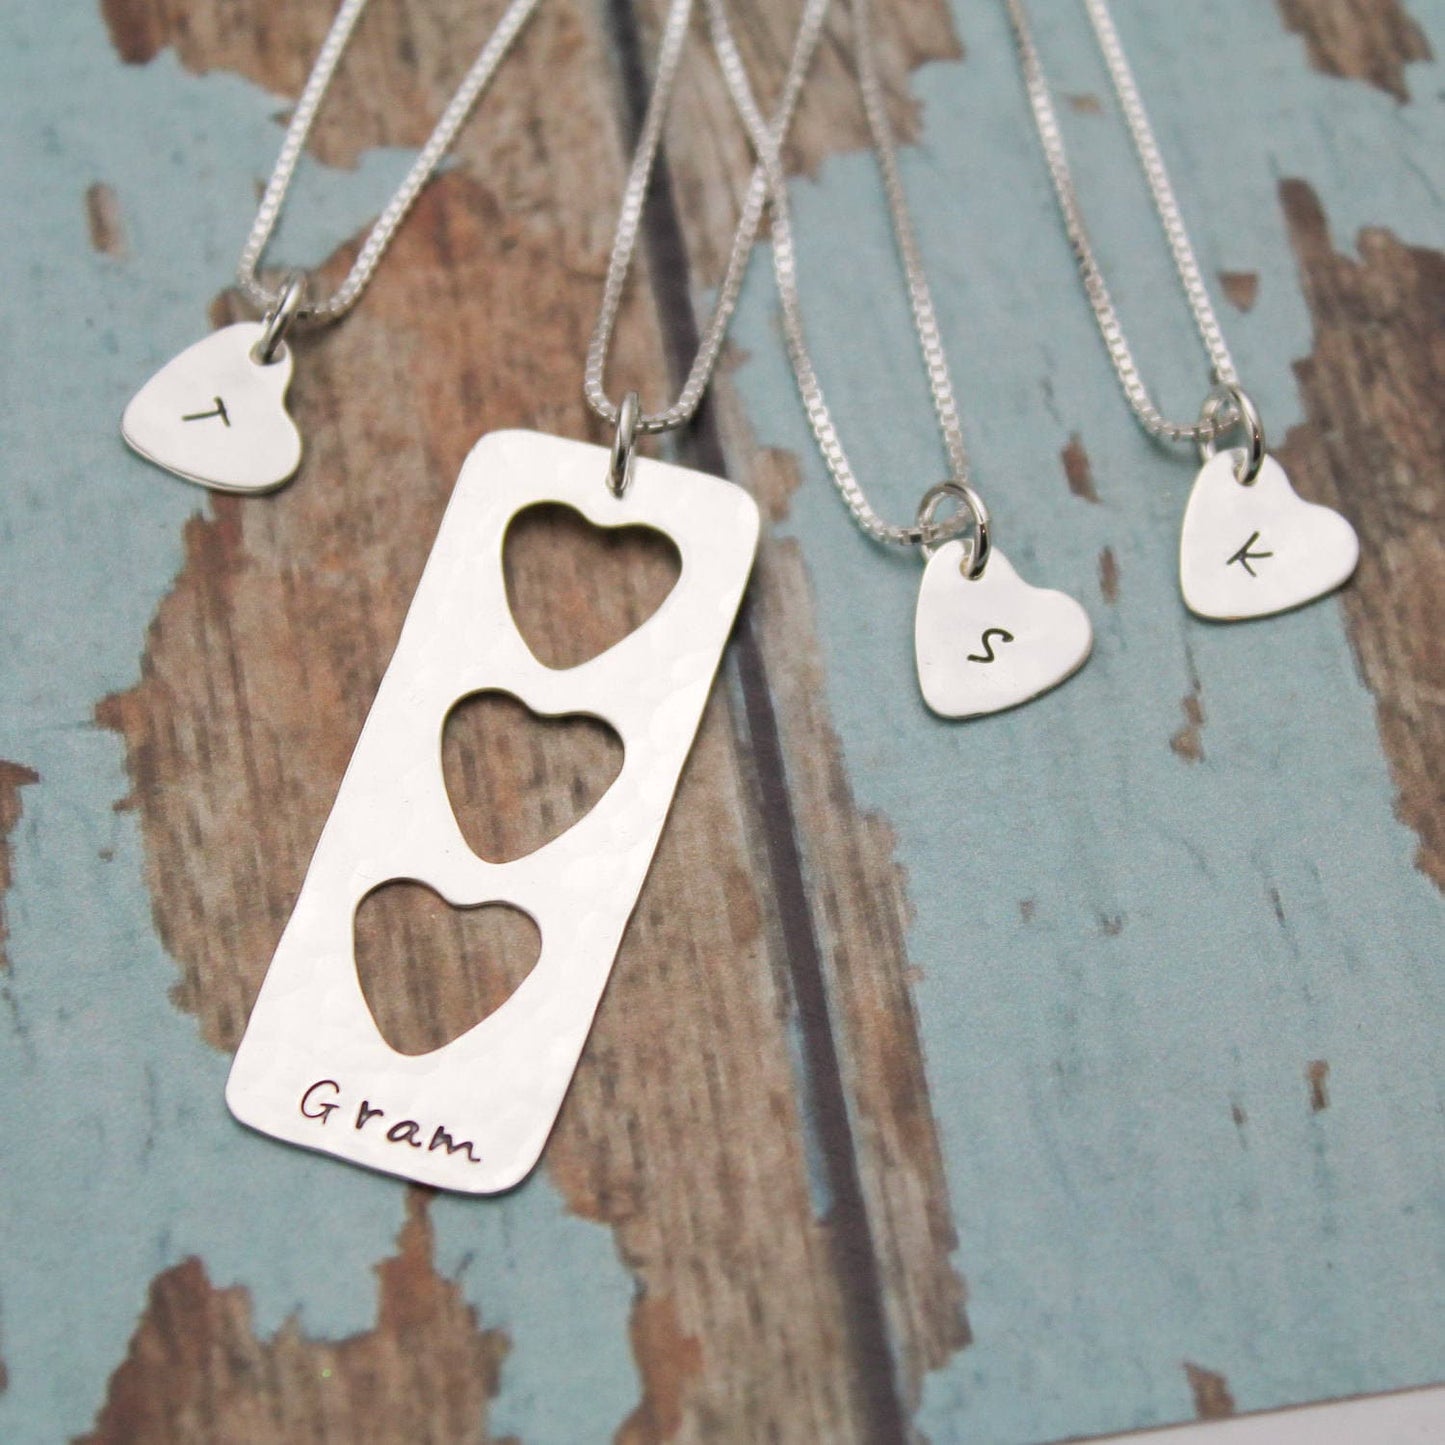 Grandmother Granddaughter Set of 4 Heart Personalized Necklace Set Mother Daughter Heart Necklaces Sterling Silver Personalized Hand Stamped